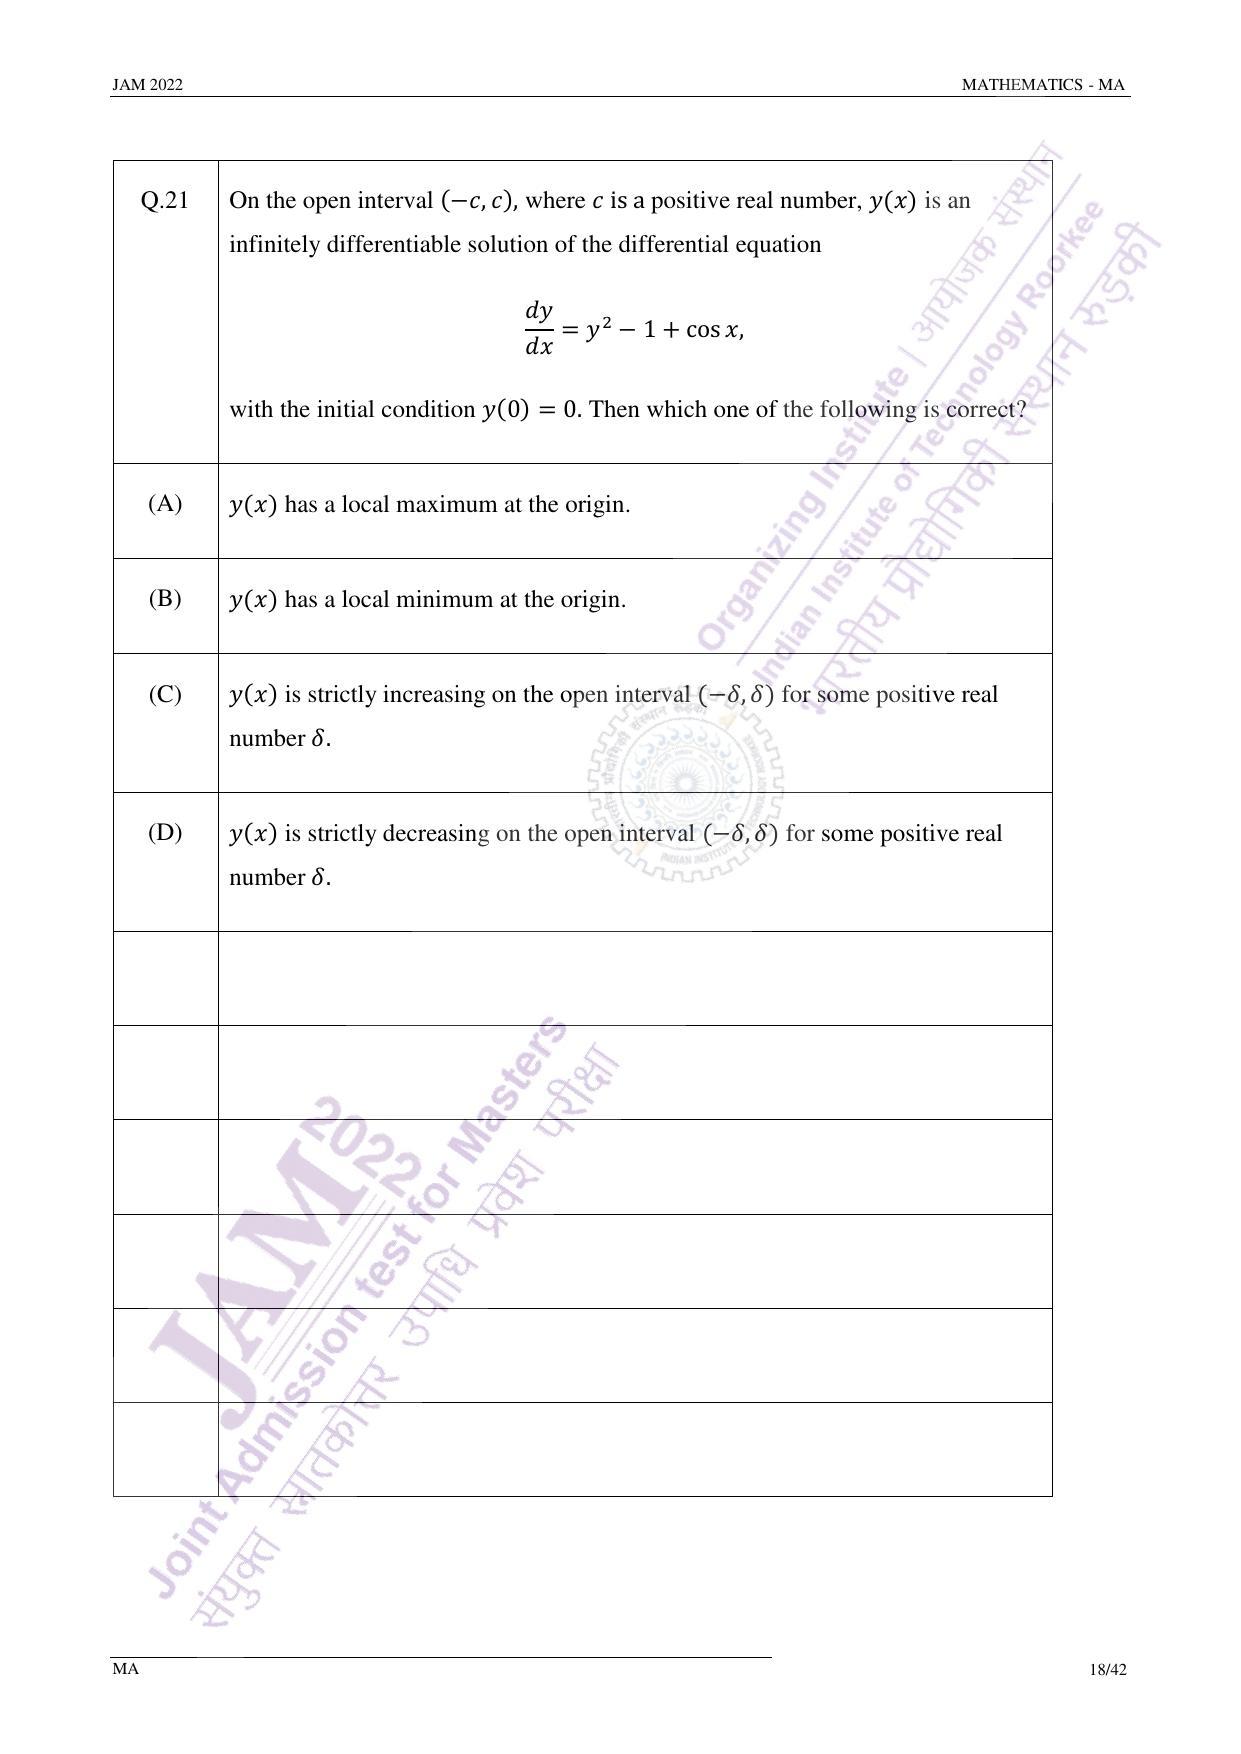 JAM 2022: MA Question Paper - Page 18